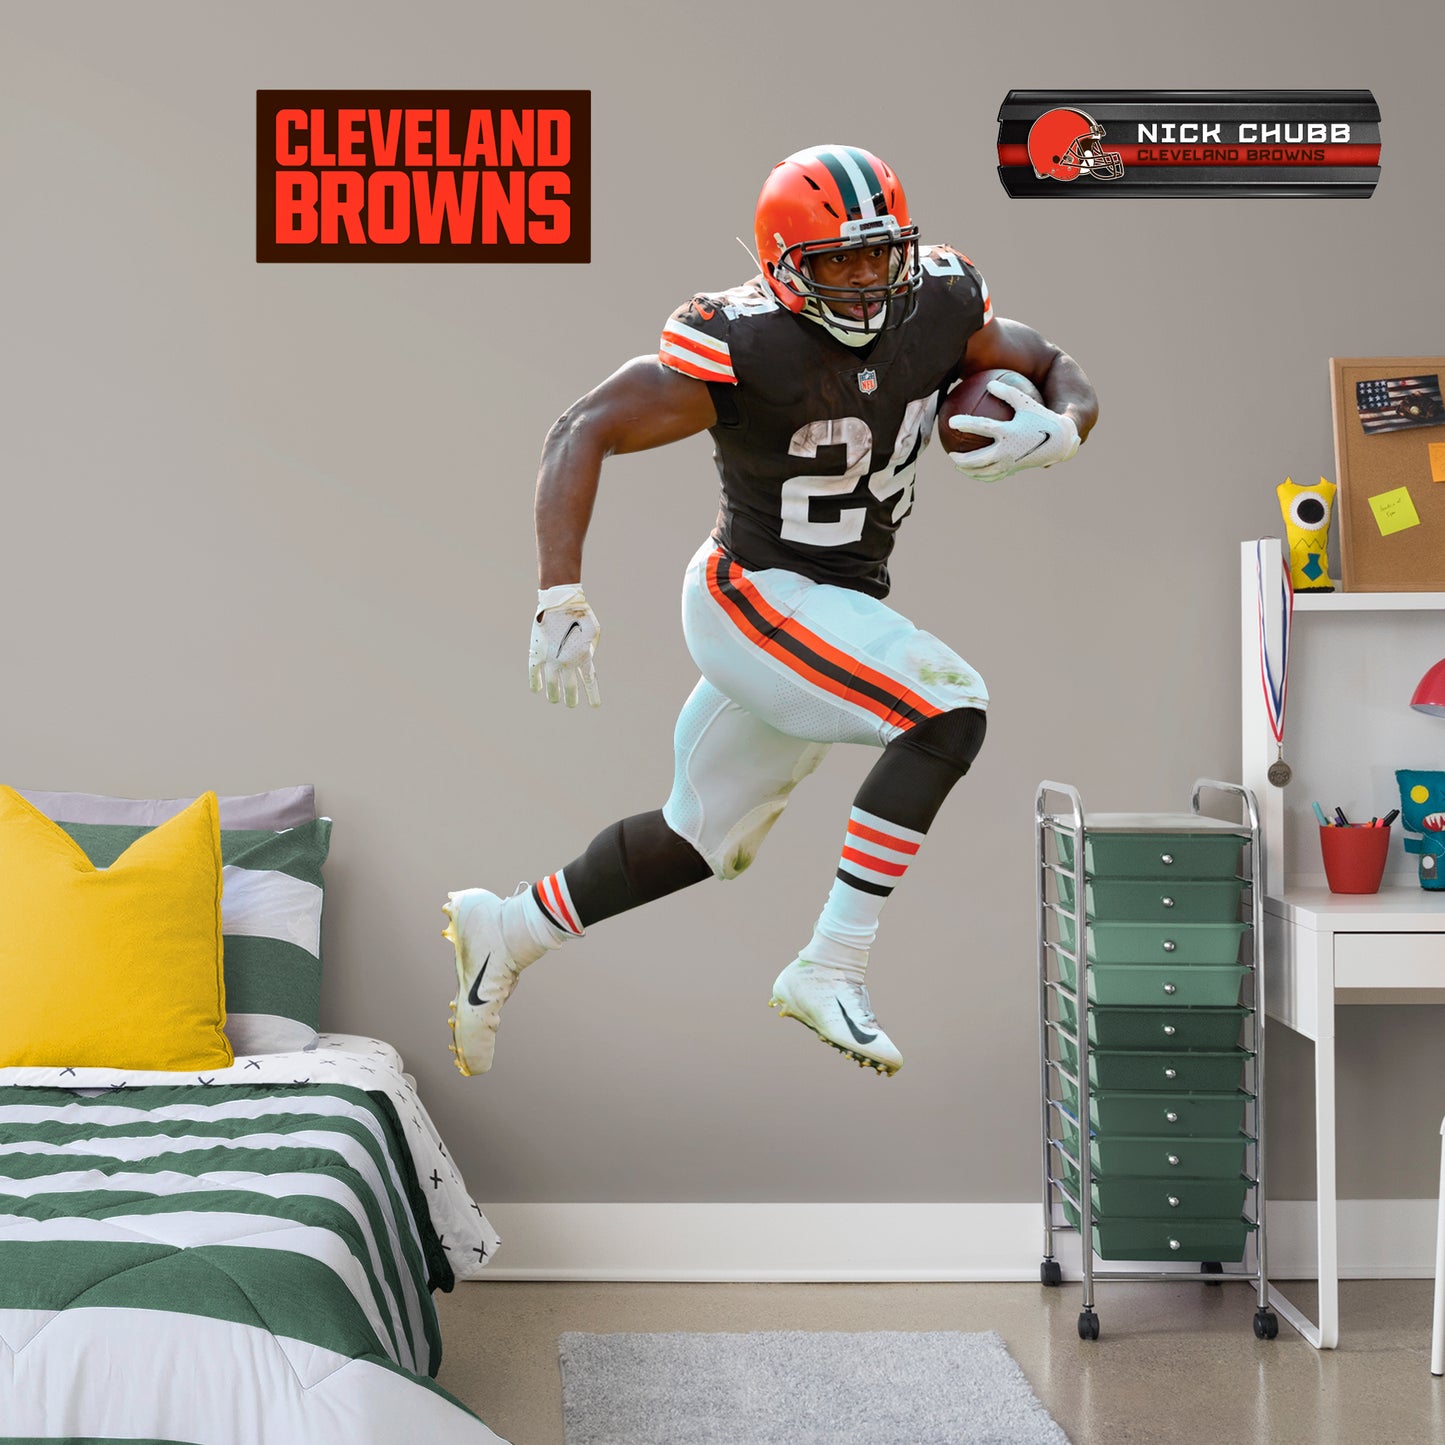 Life-Size Athlete + 2 Decals (51"W x 72.5"H) Bring the action of the NFL into your home with a wall decal of Nick Chubb! High quality, durable, and tear resistant, you'll be able to stick and move it as many times as you want to create the ultimate football experience in any room!